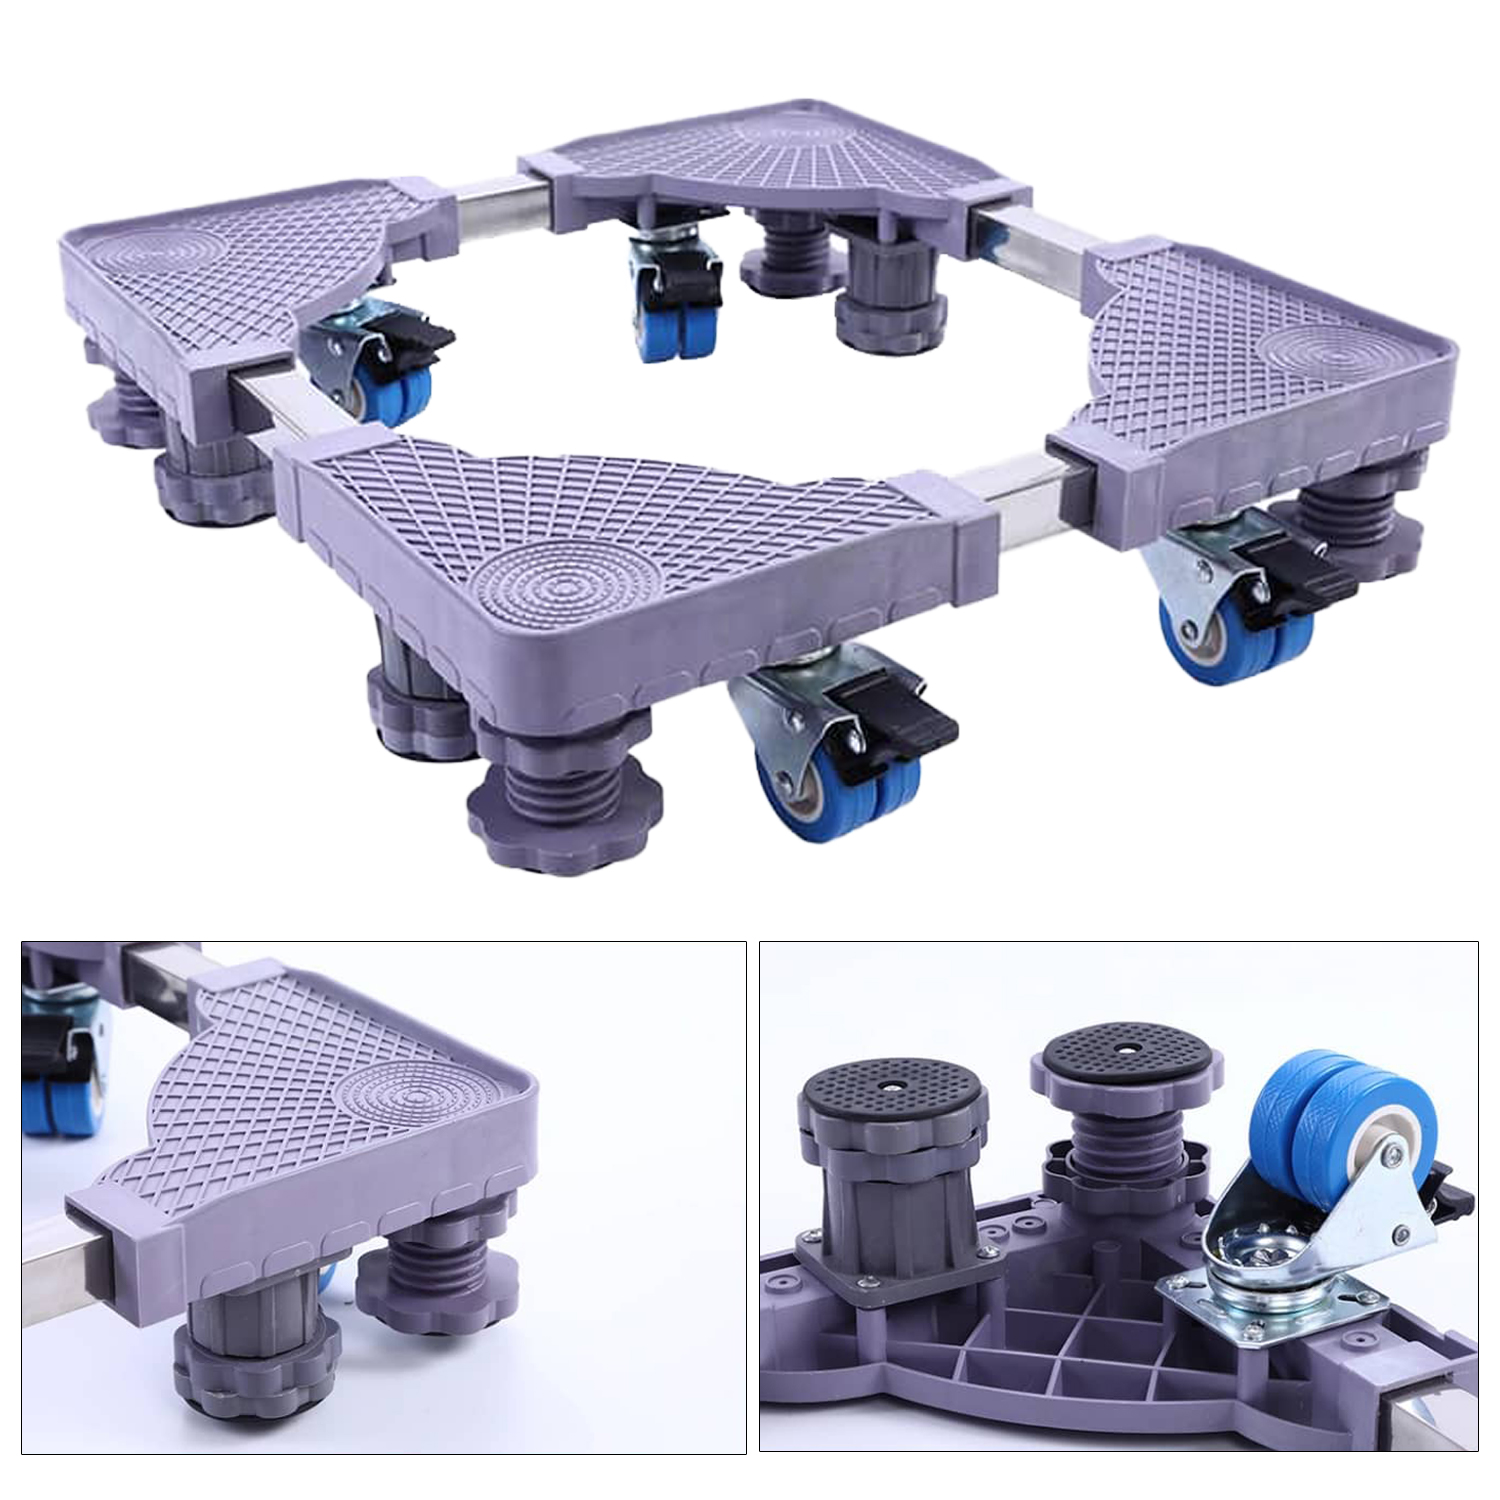 Heavy Duty Washing Machine Stand Casters Movable Mobile Refrigerator Adjustable Base Large Universal Rotation 4 Wheels